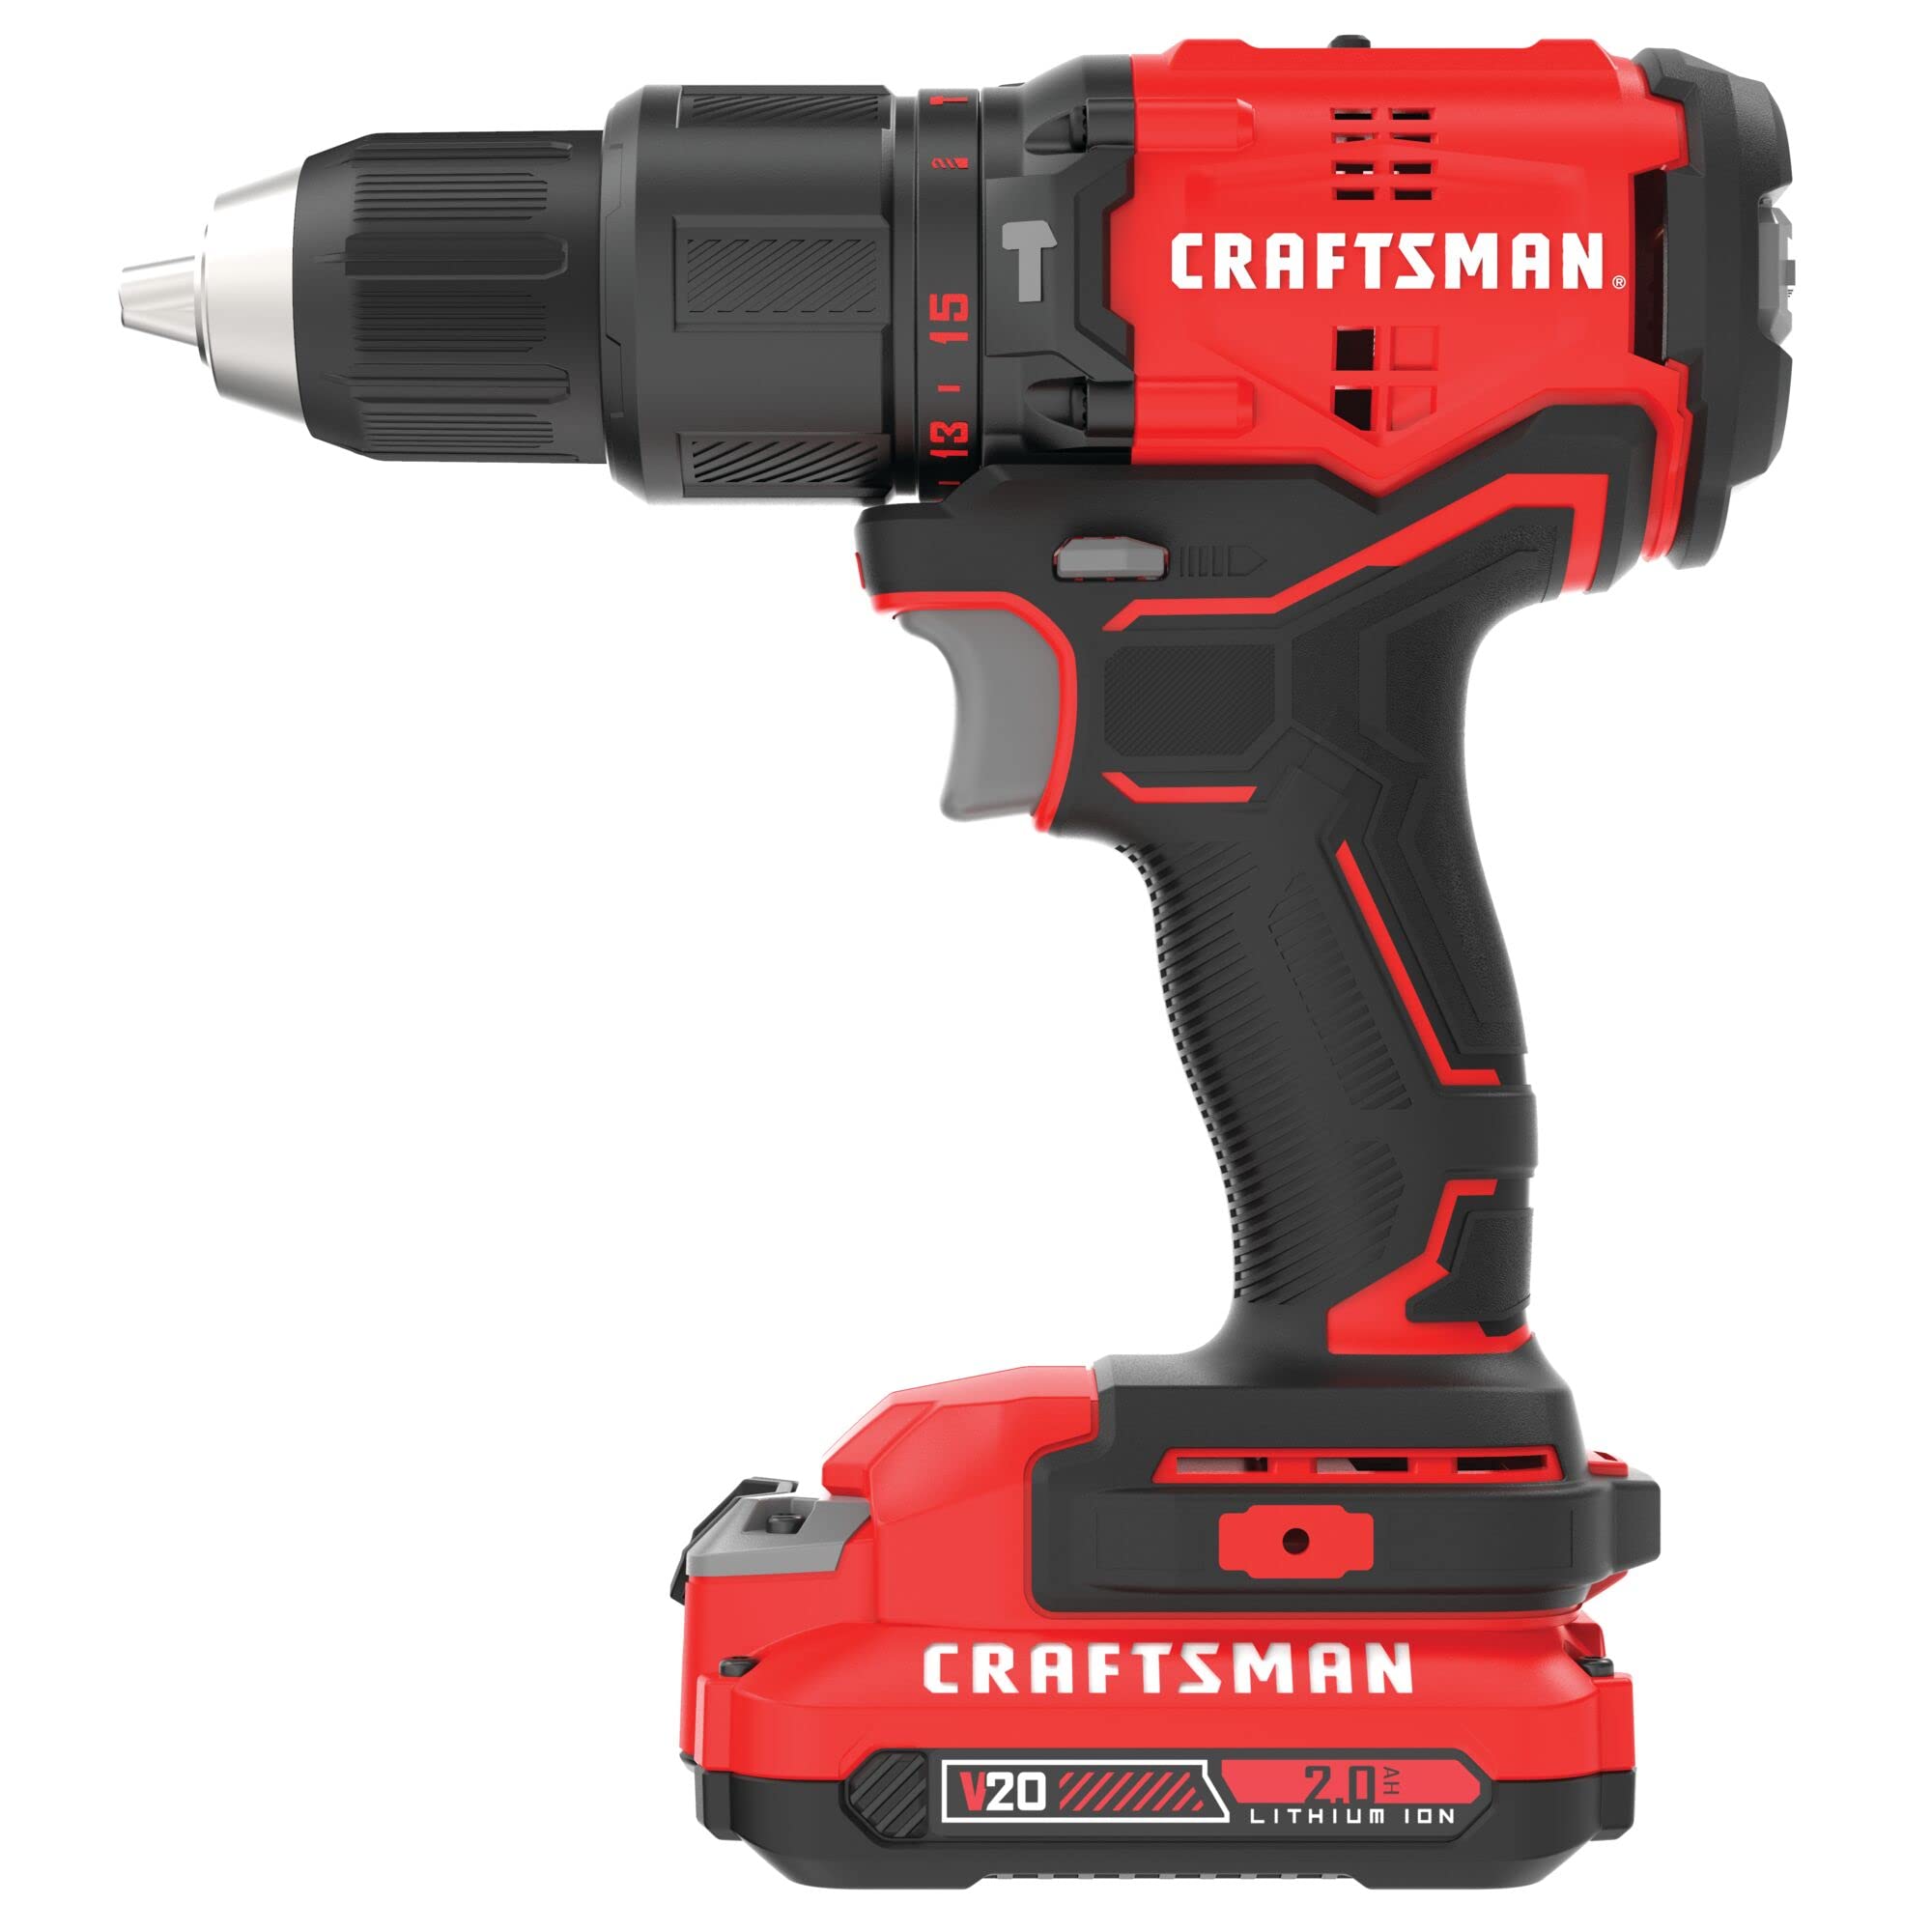 CRAFTSMAN V20 Hammer Drill, 1/2 Inch Ratcheting Chuck, 2 Batteries and Charger Included (CMCD731D2)